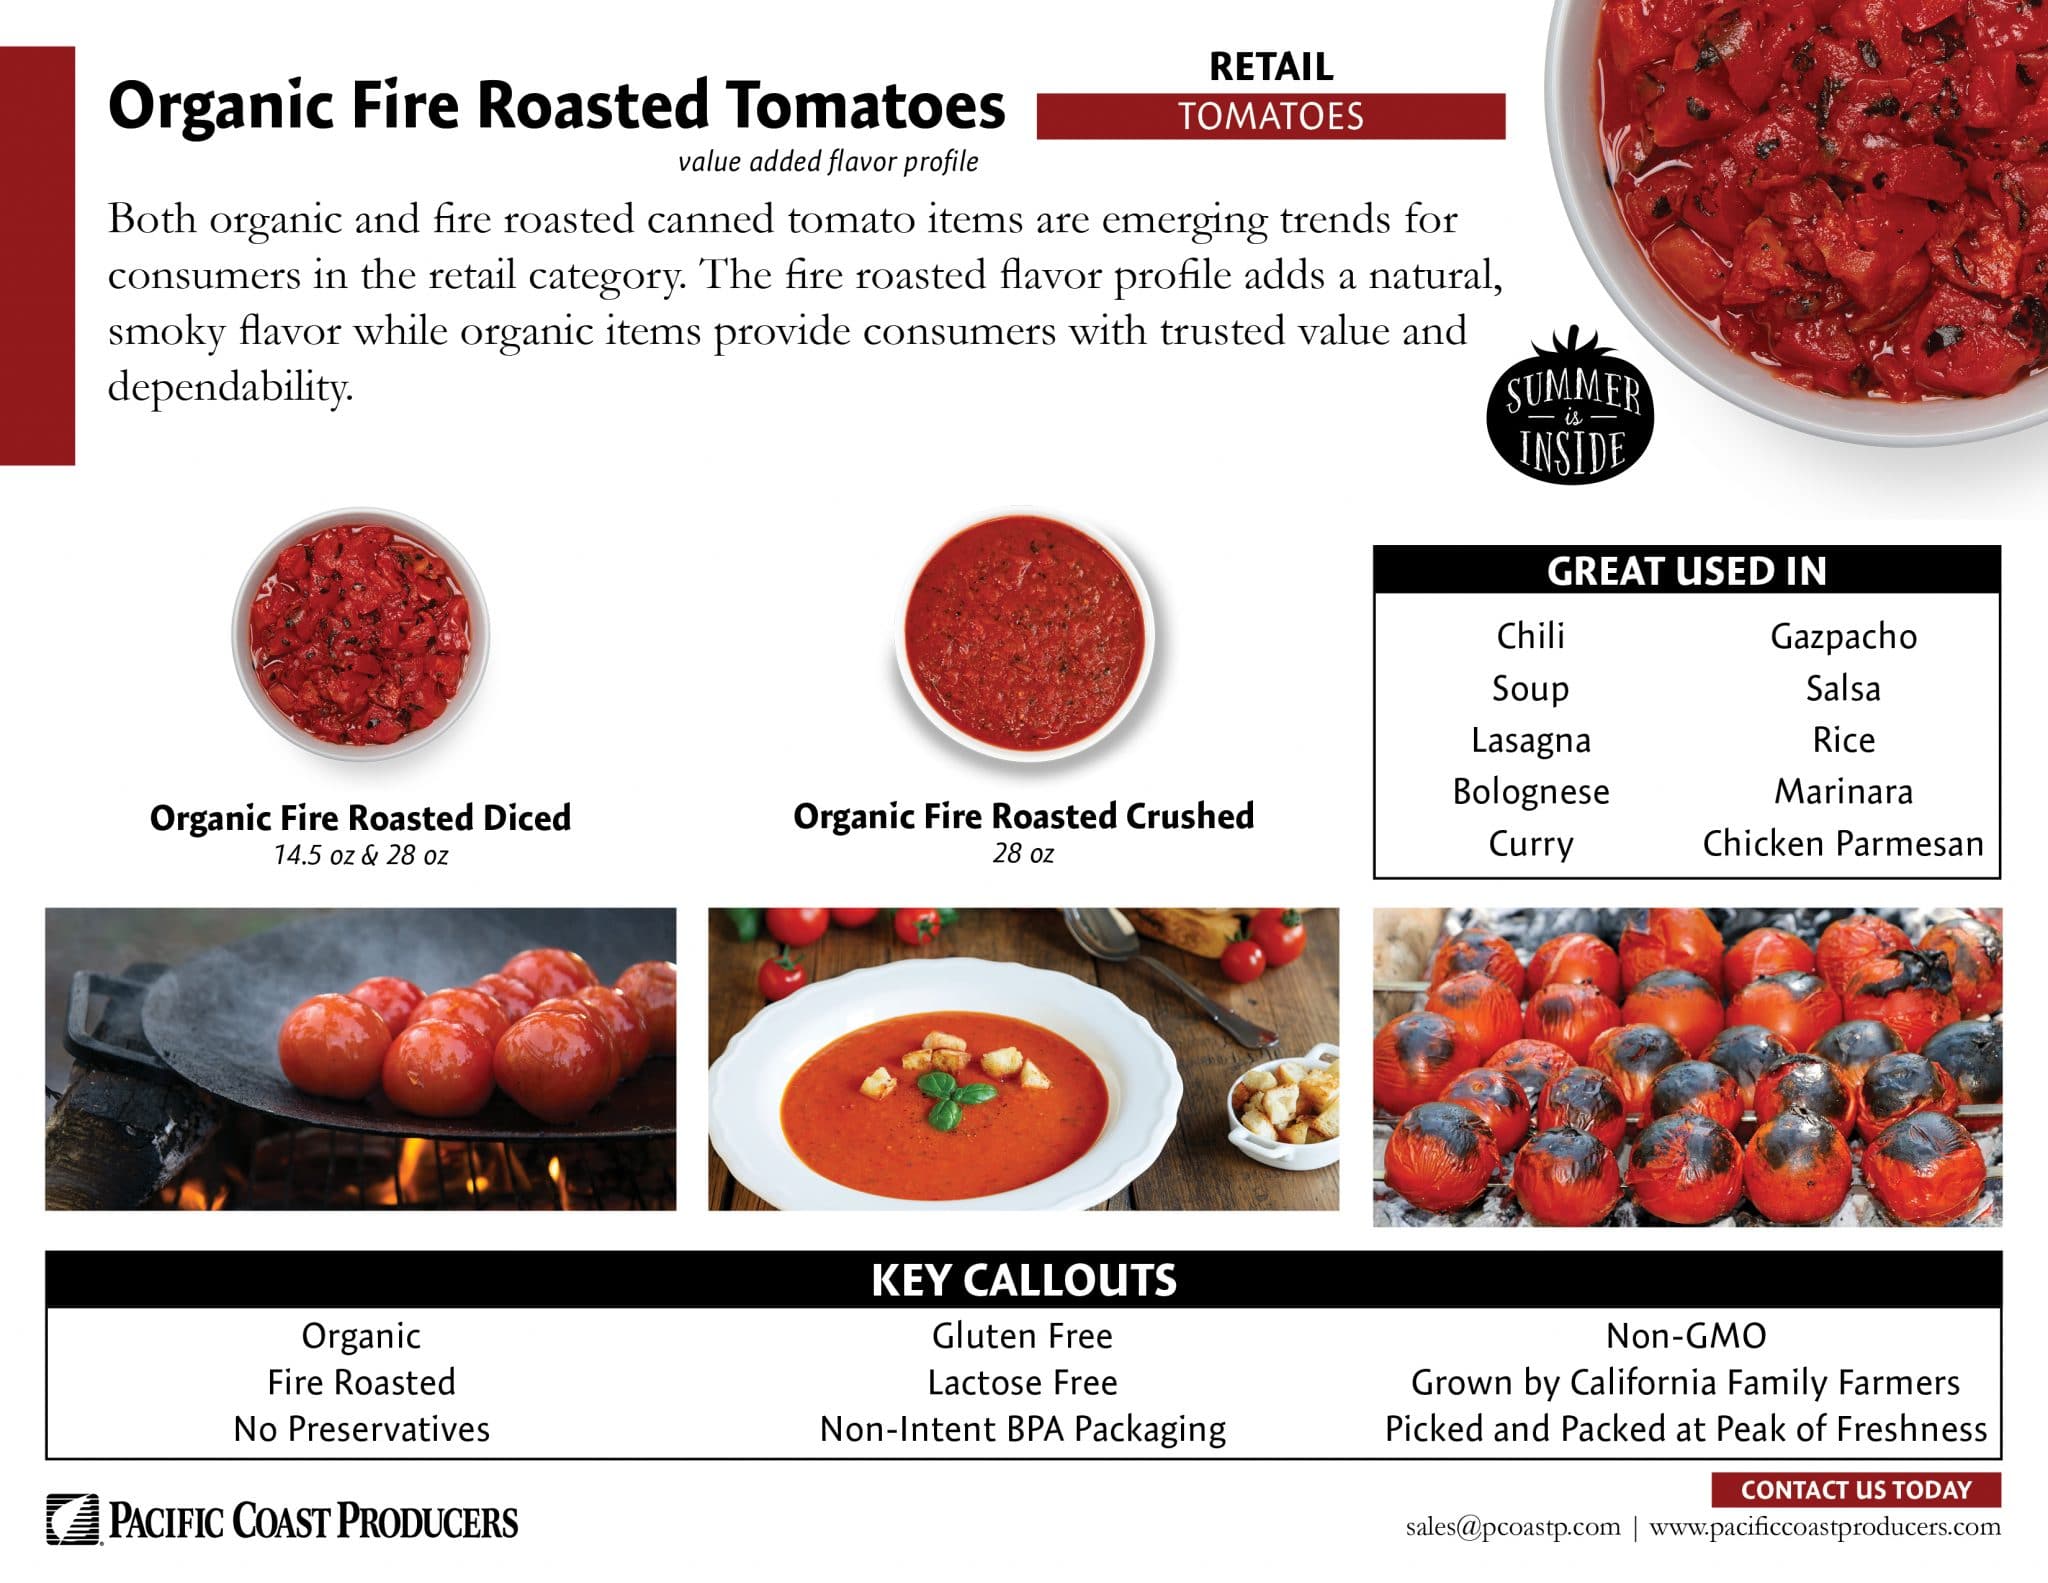 Organic fire roasted tomatoes infographic for retail.